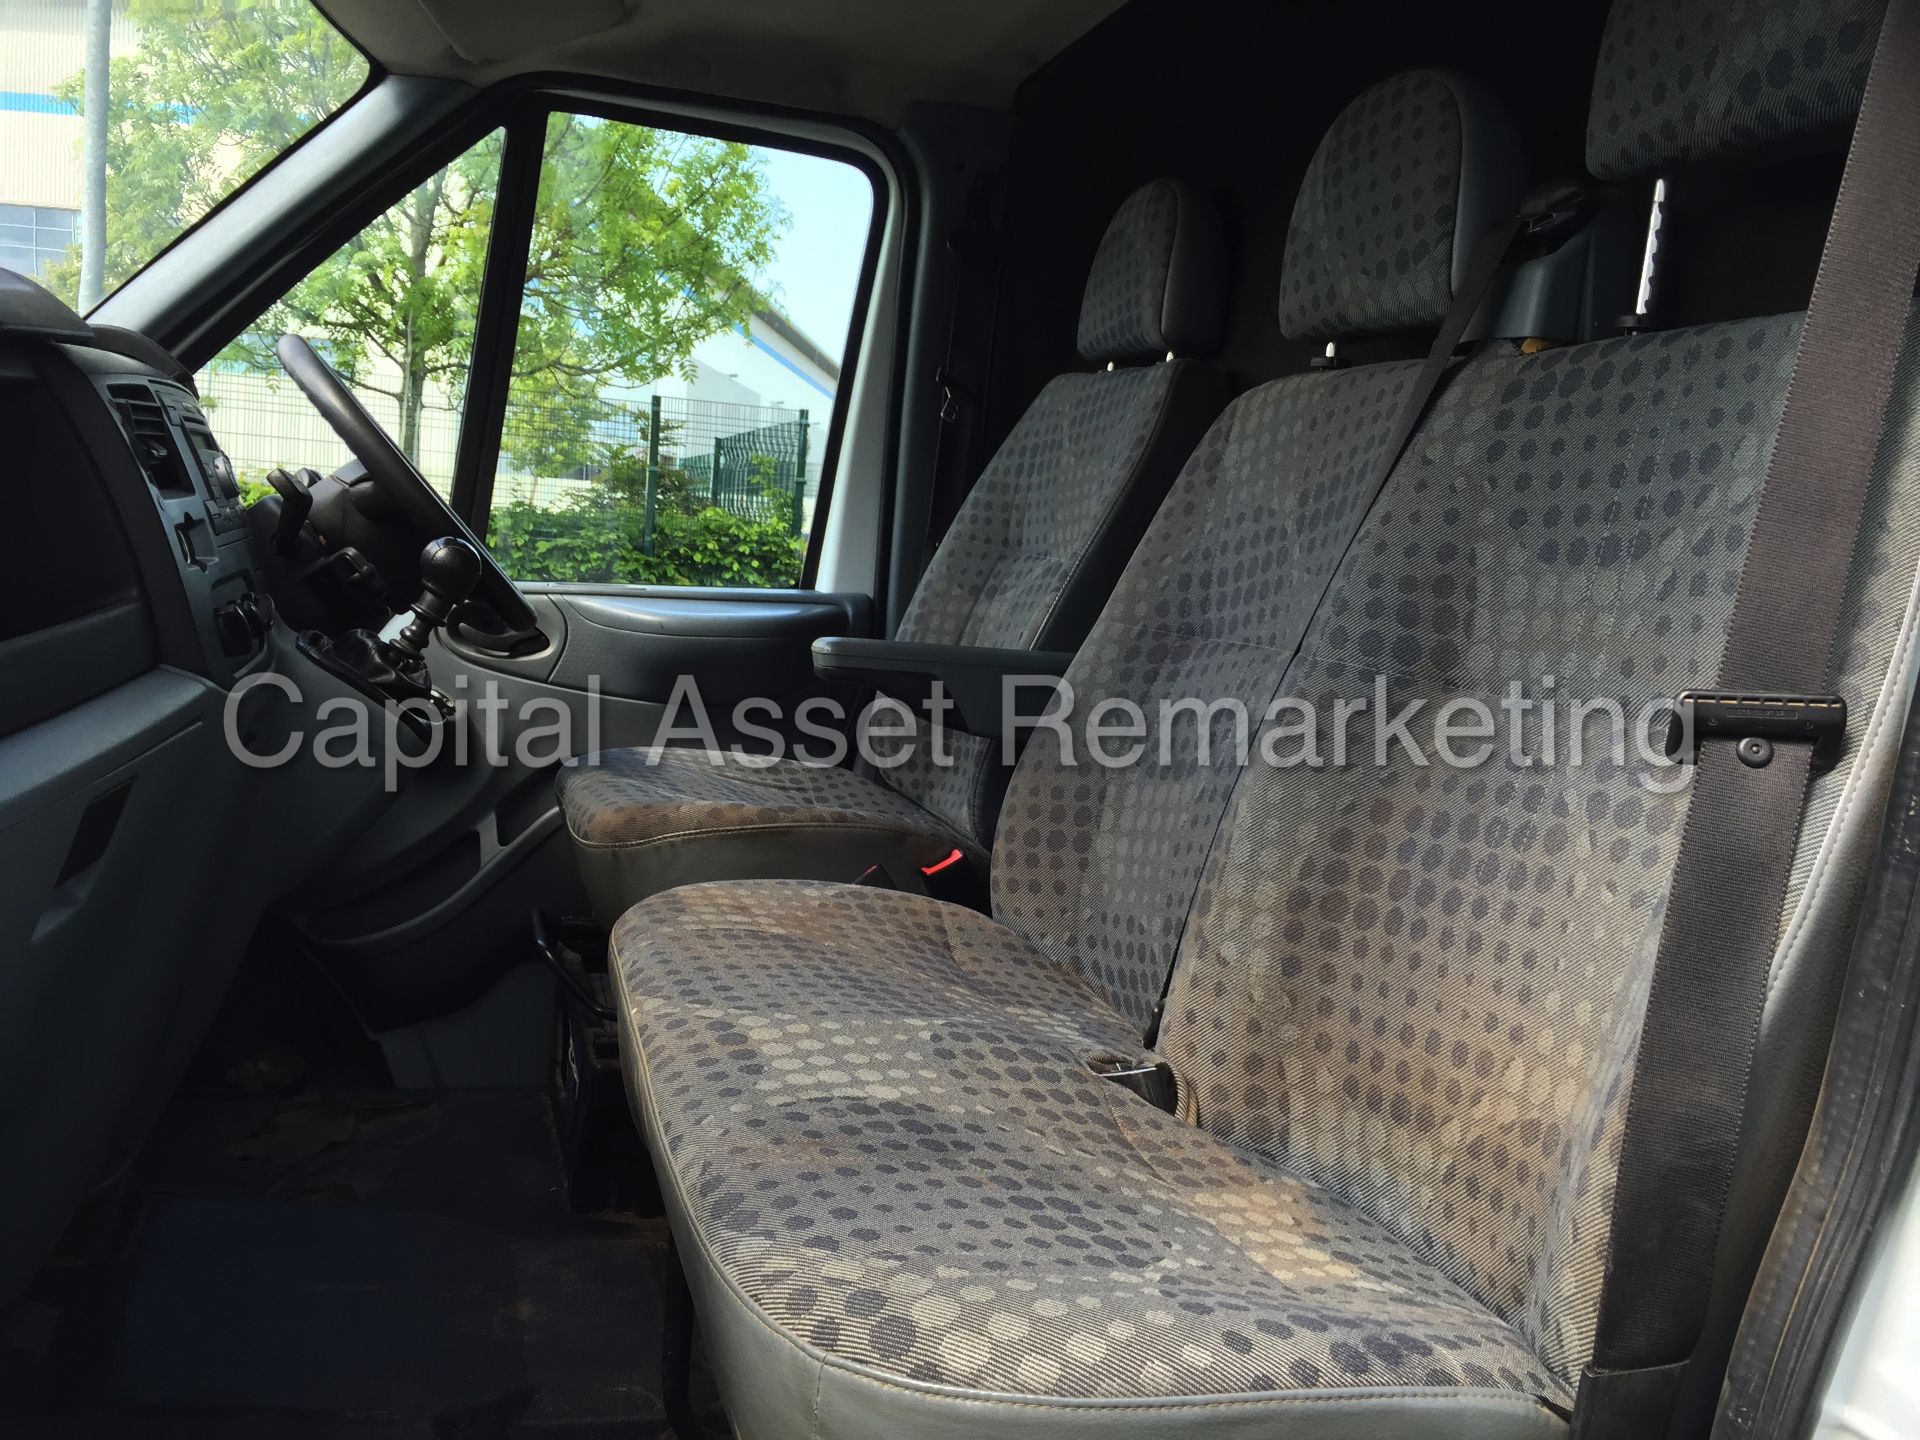 FORD TRANSIT 2.2TDCI - T350 - EXTRA LONG WHEEL BASE "JUMBO" - 12 REG - 1 OWNER FROM NEW - LOW MILES! - Image 16 of 18